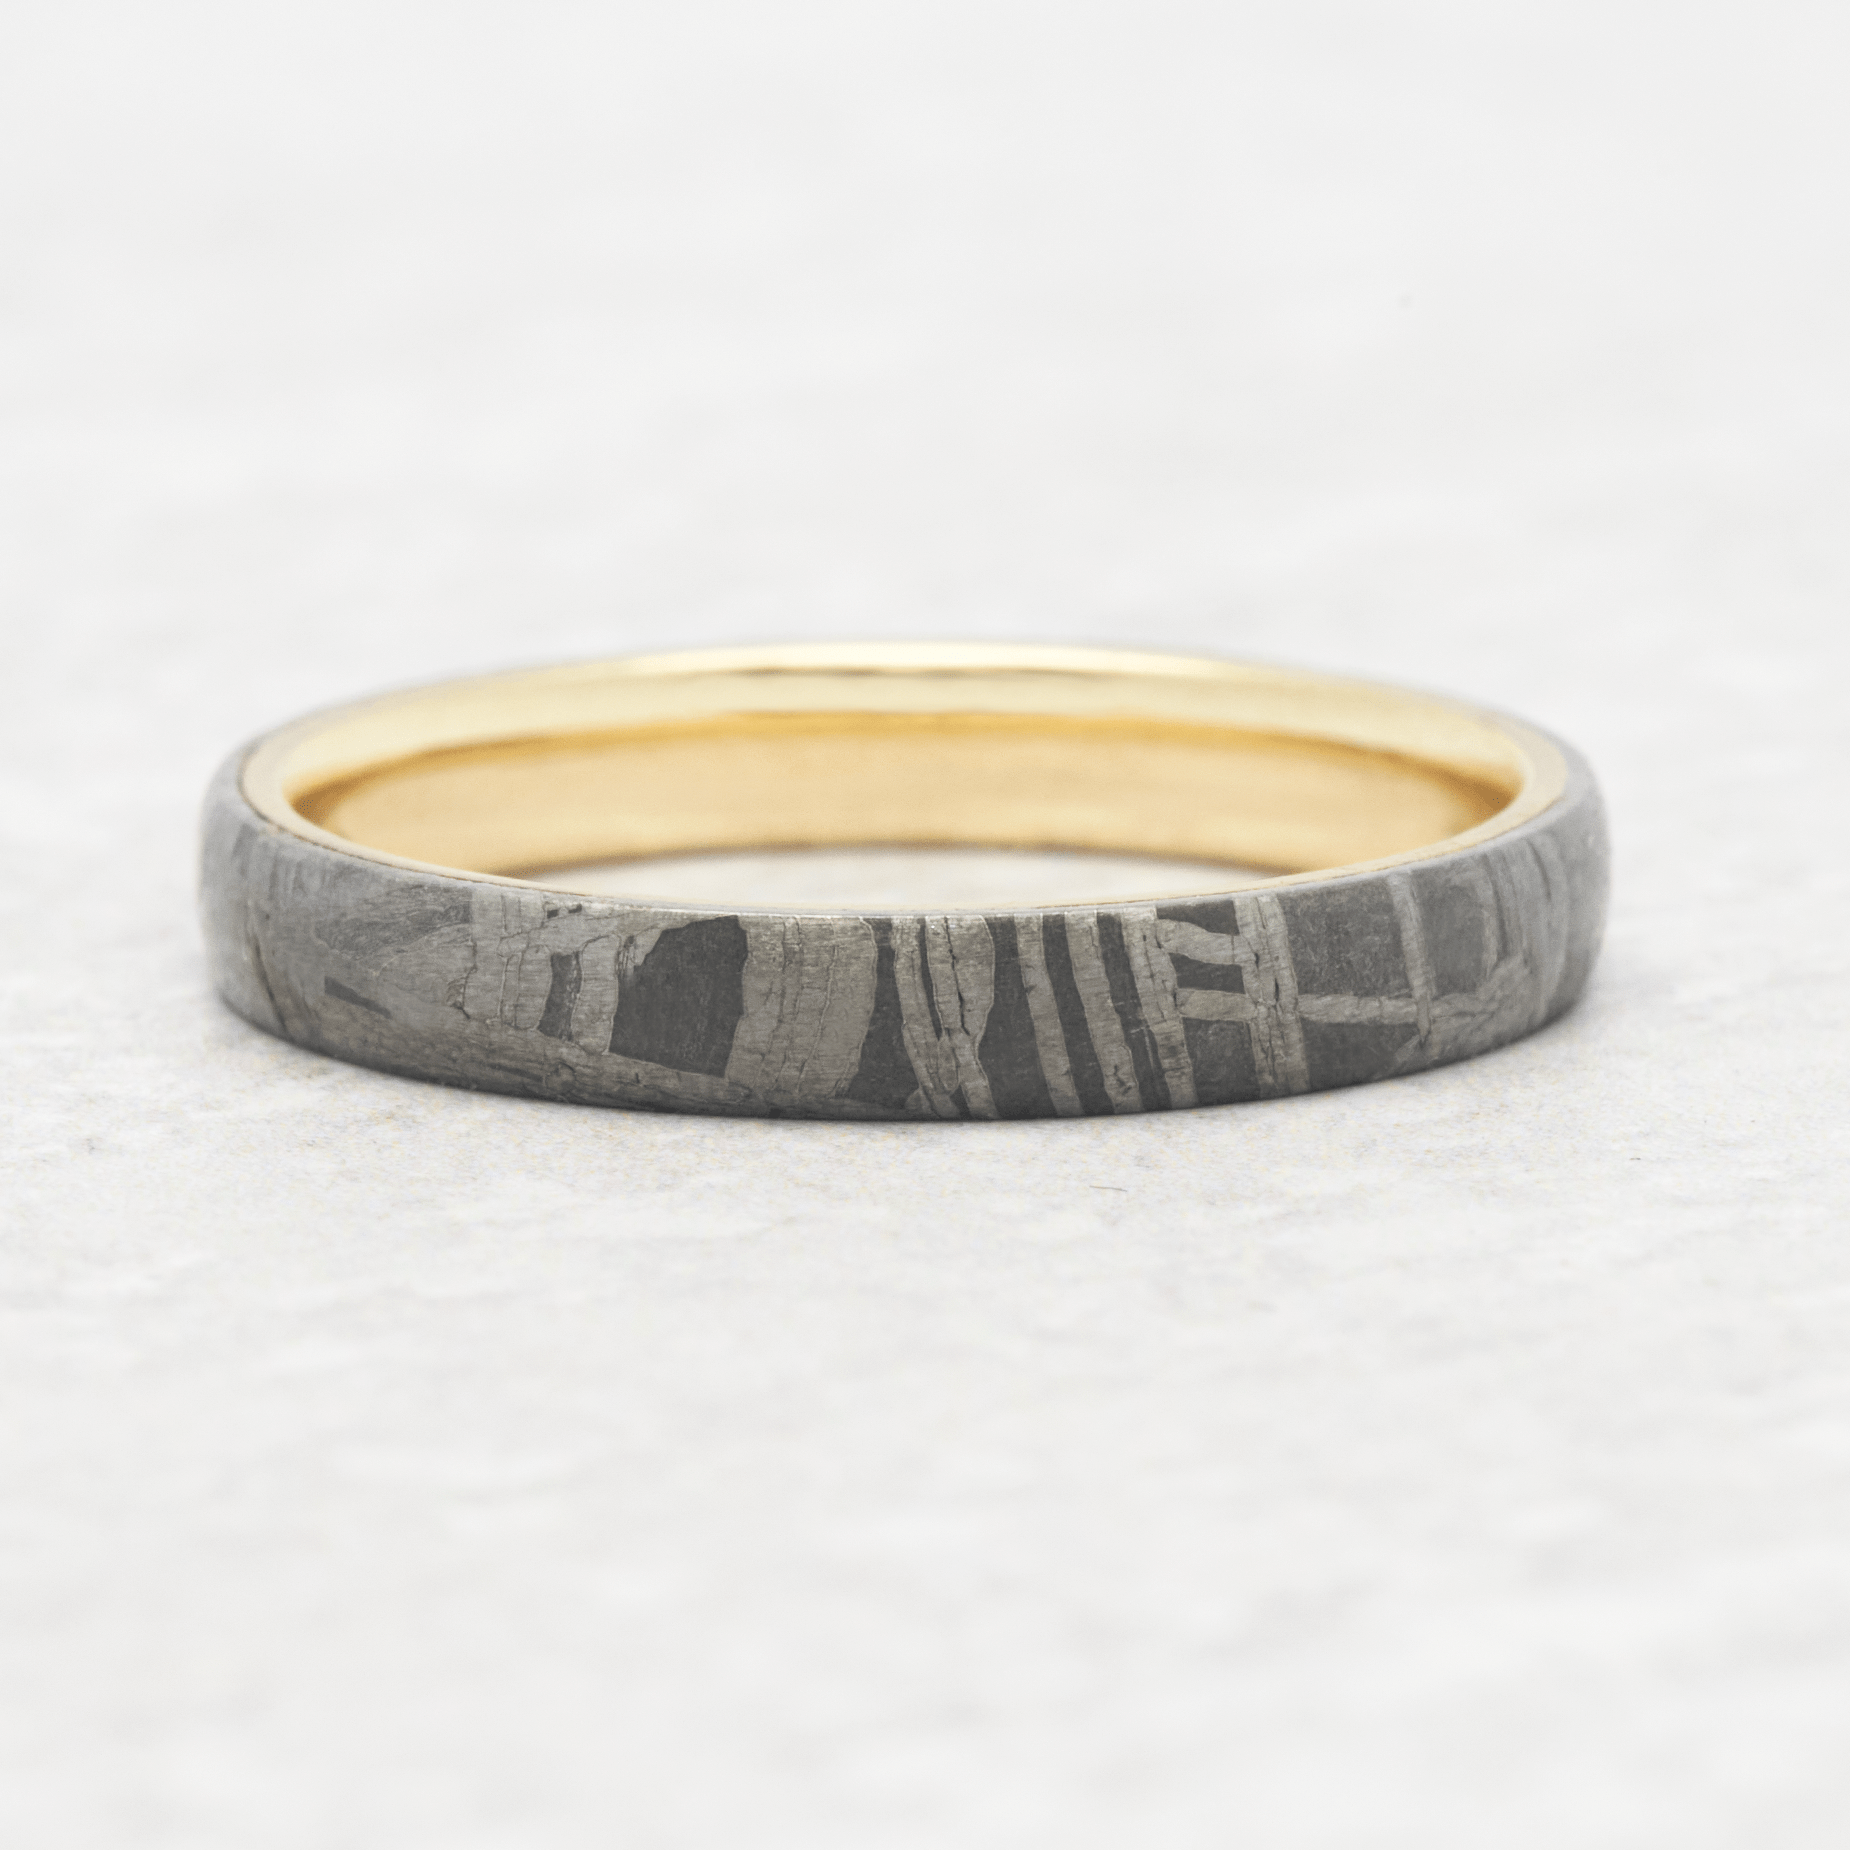 The Sally - Men's Wedding Rings - Manly Bands